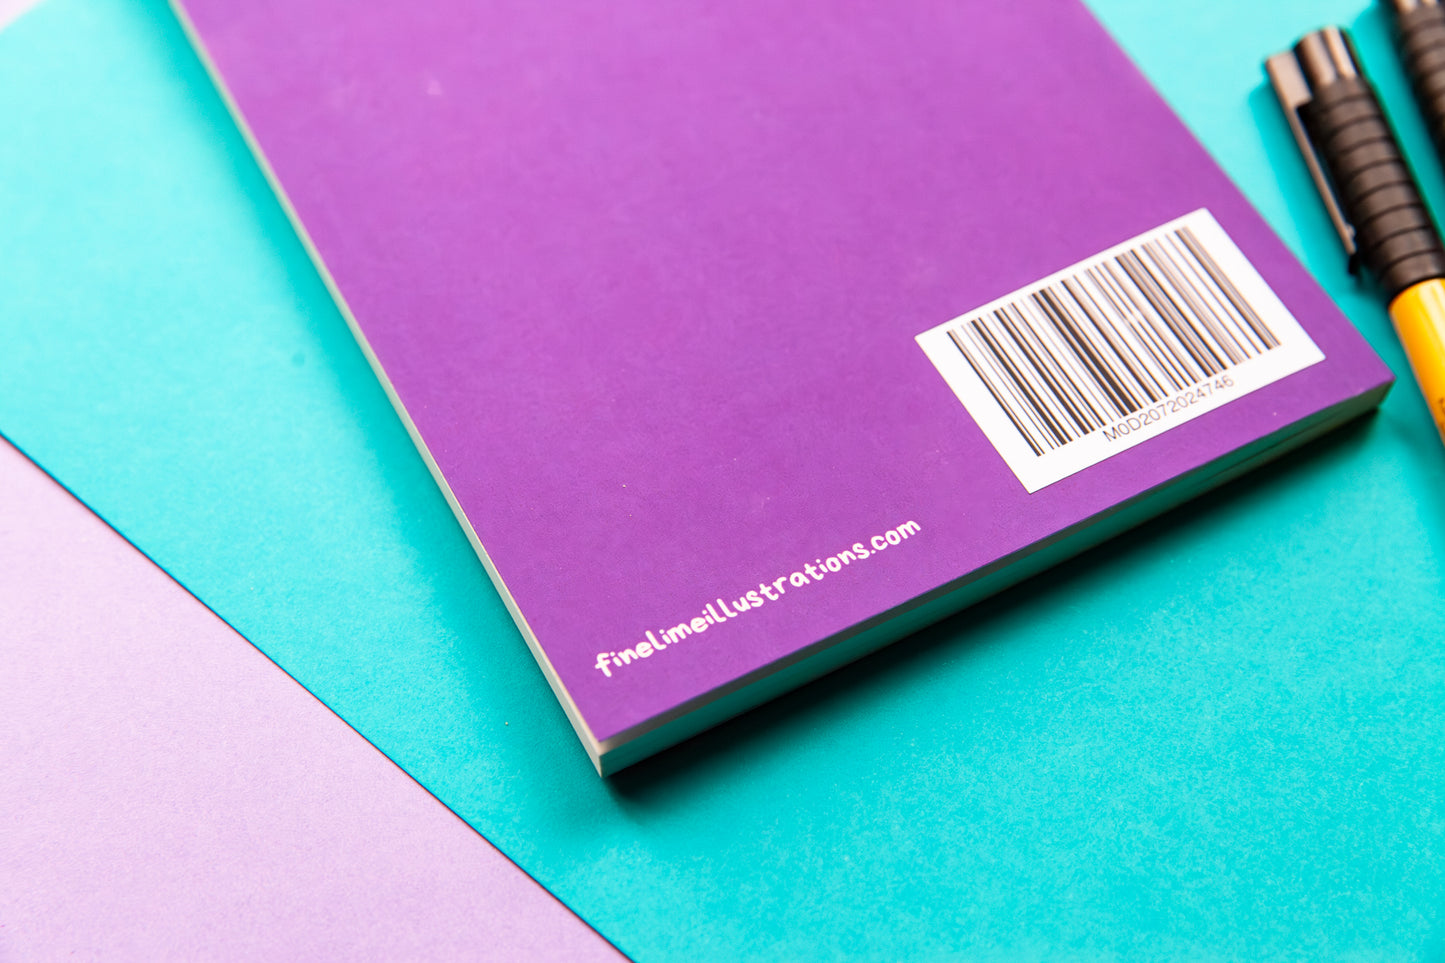 The back cover of a purple notebook showing the bar code and the company website information